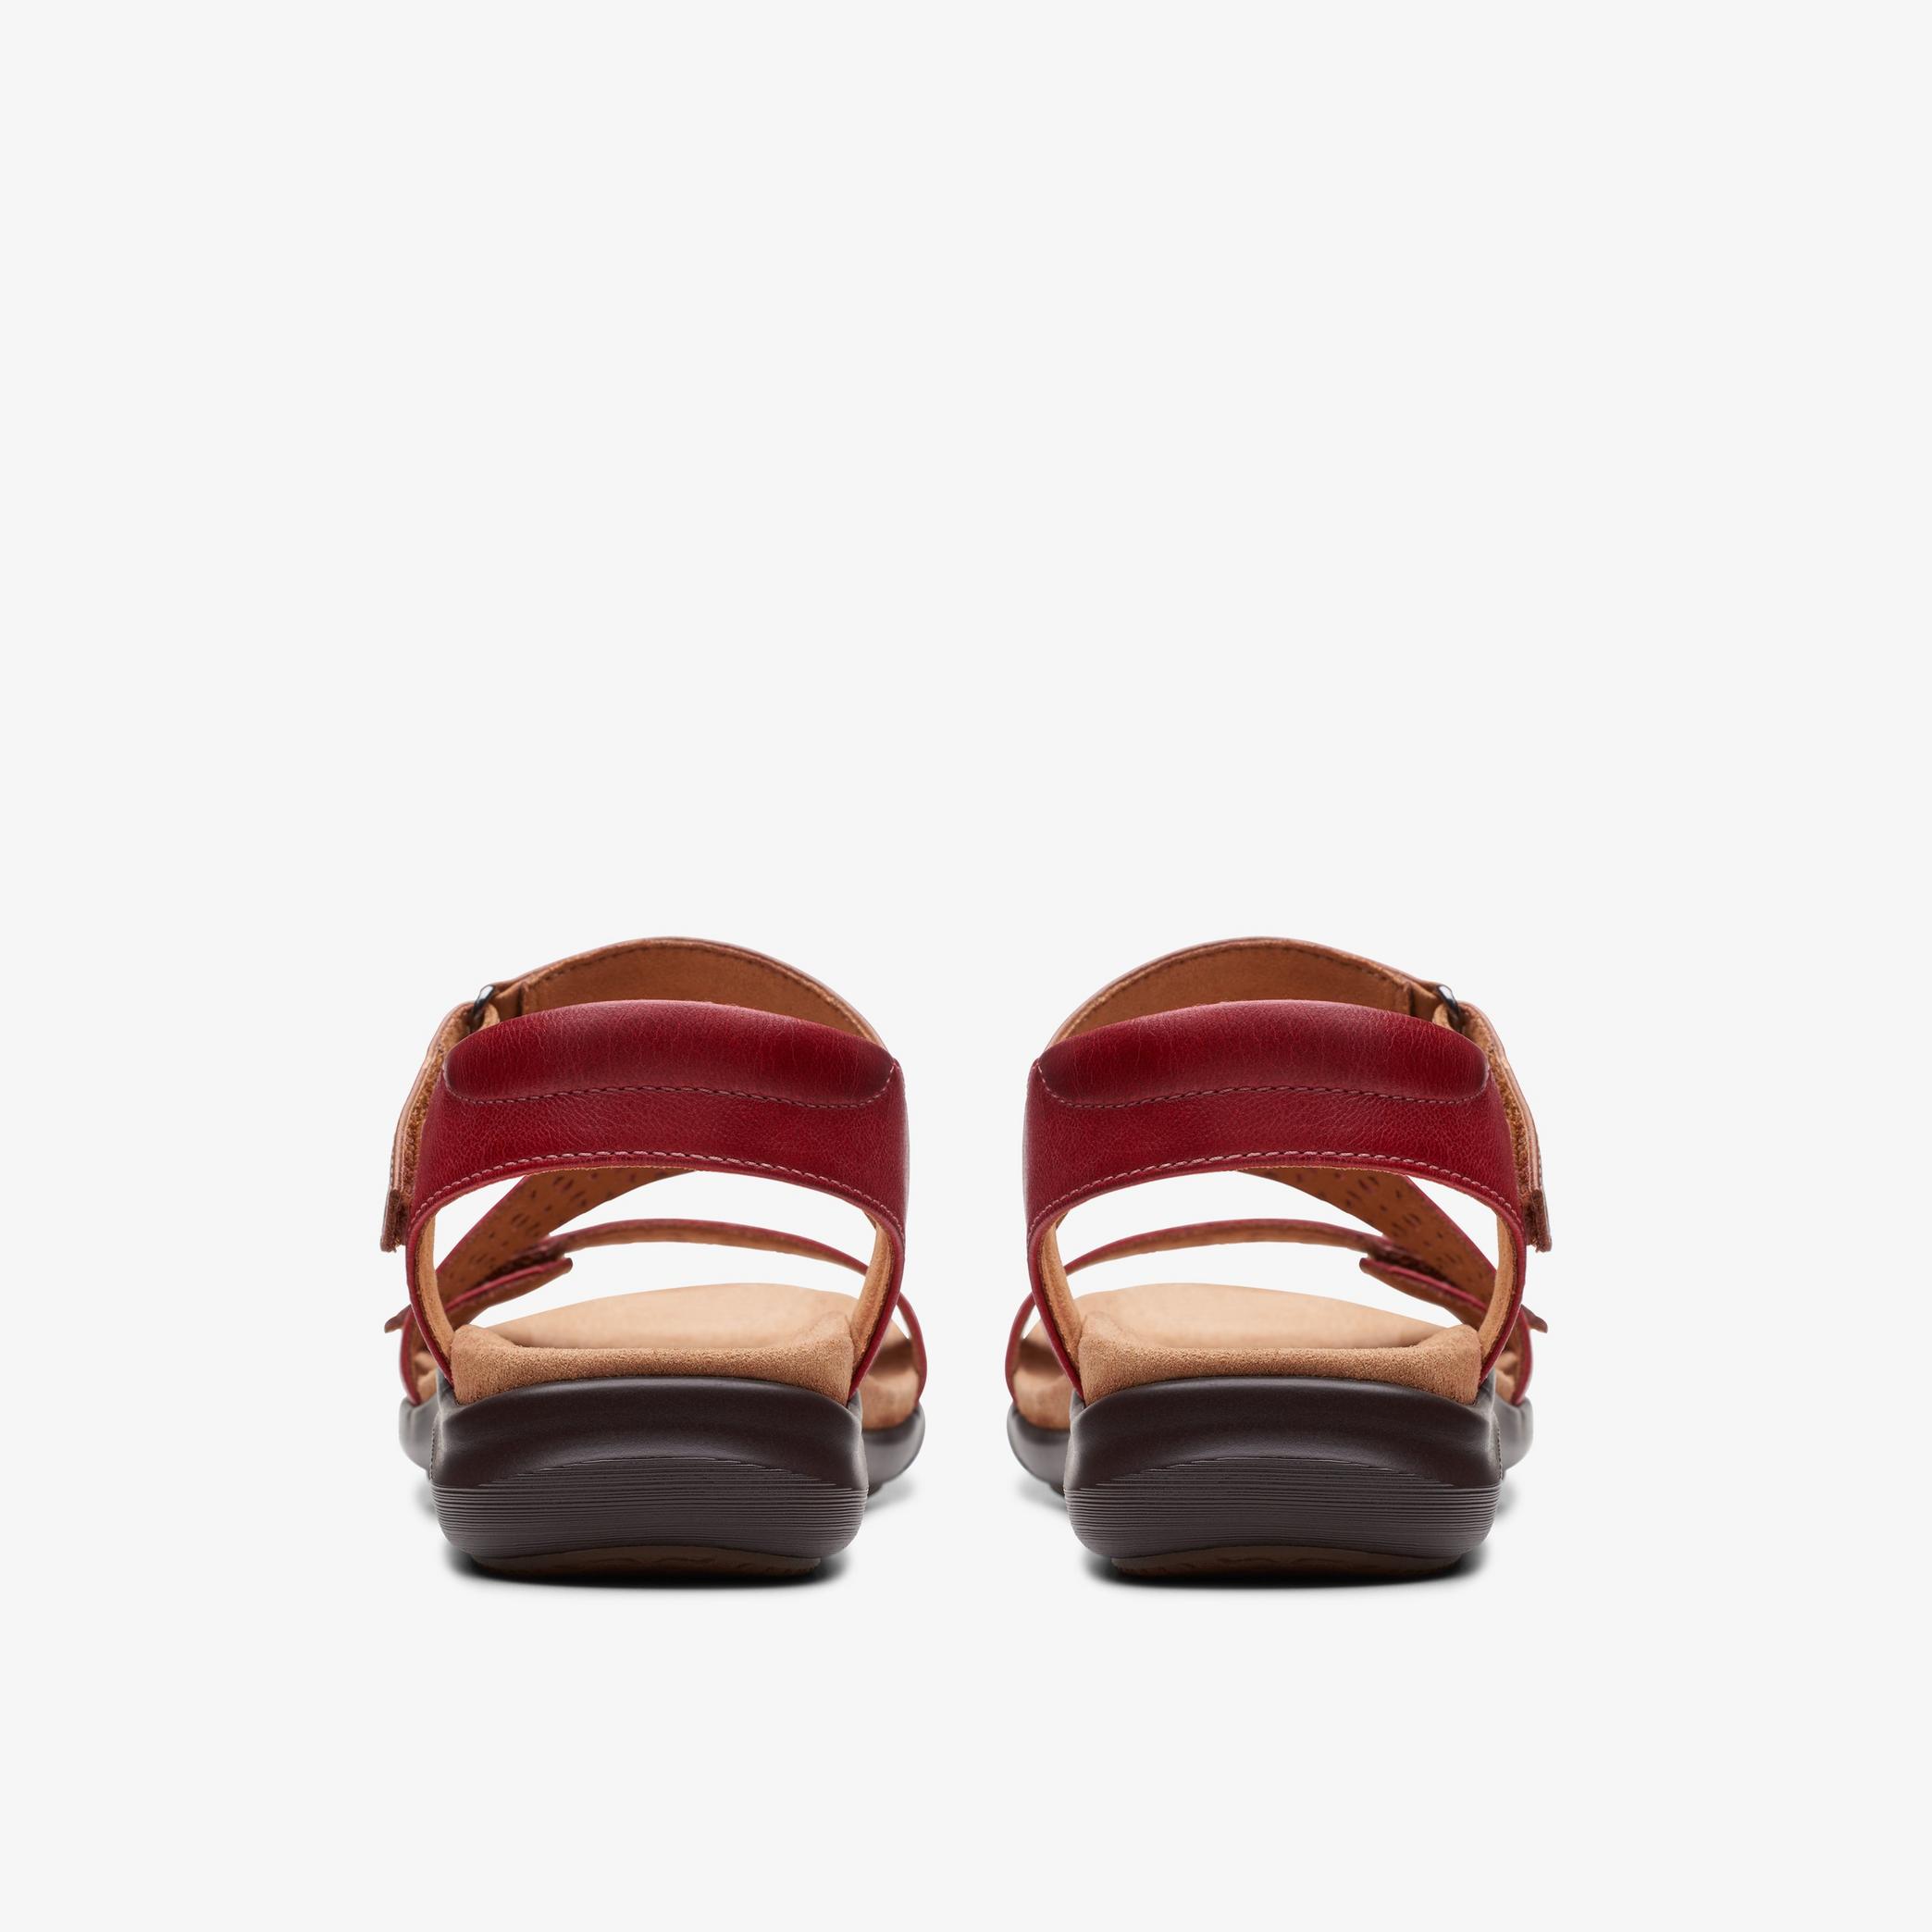 Kitly Way Cherry Leather Flat Sandals, view 5 of 6